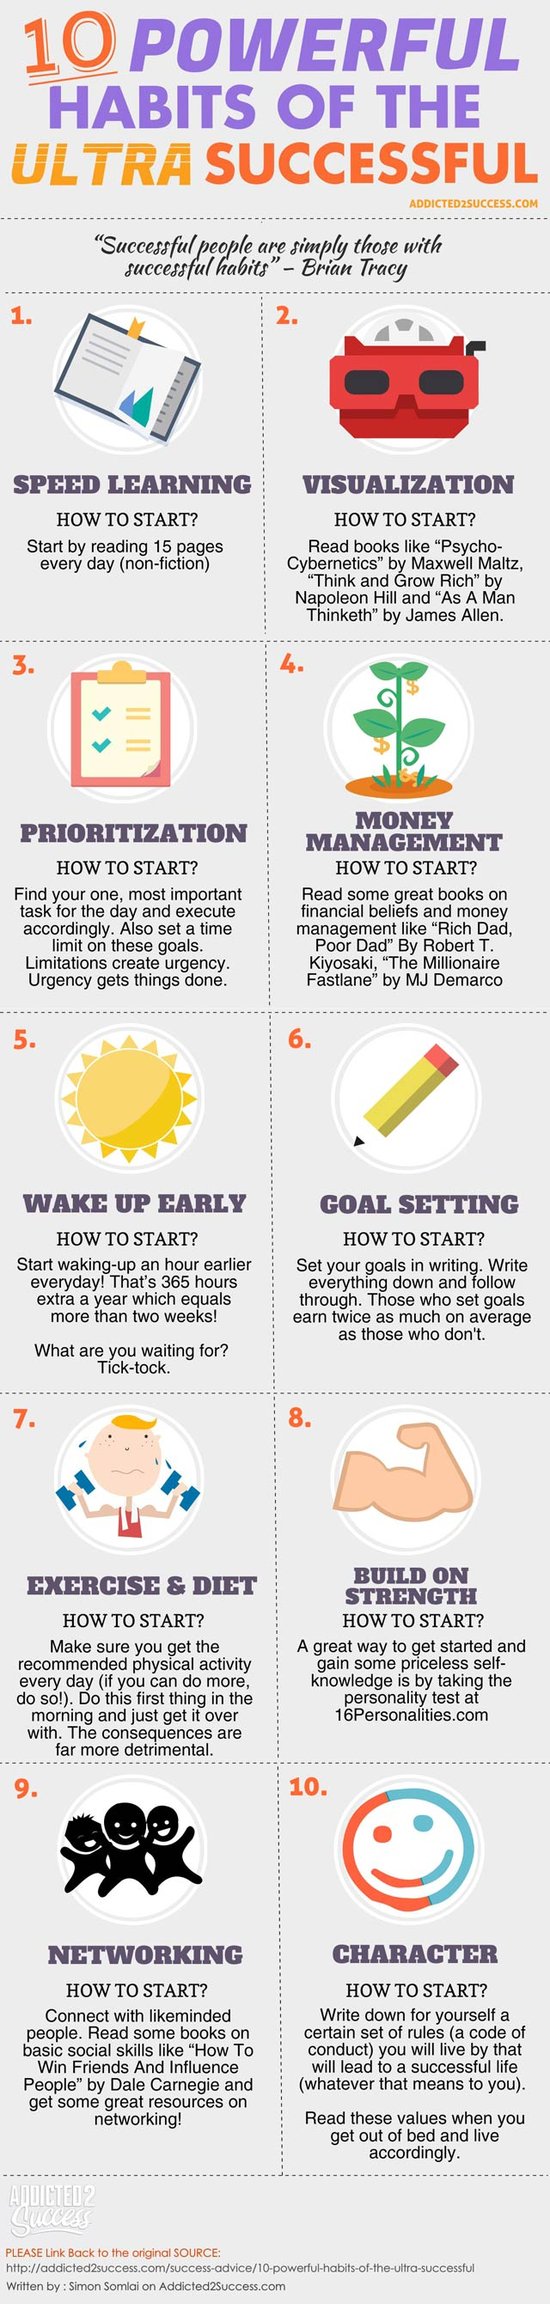 Powerful-Habits-of-The-Ultra-Successful-Infographic.jpg